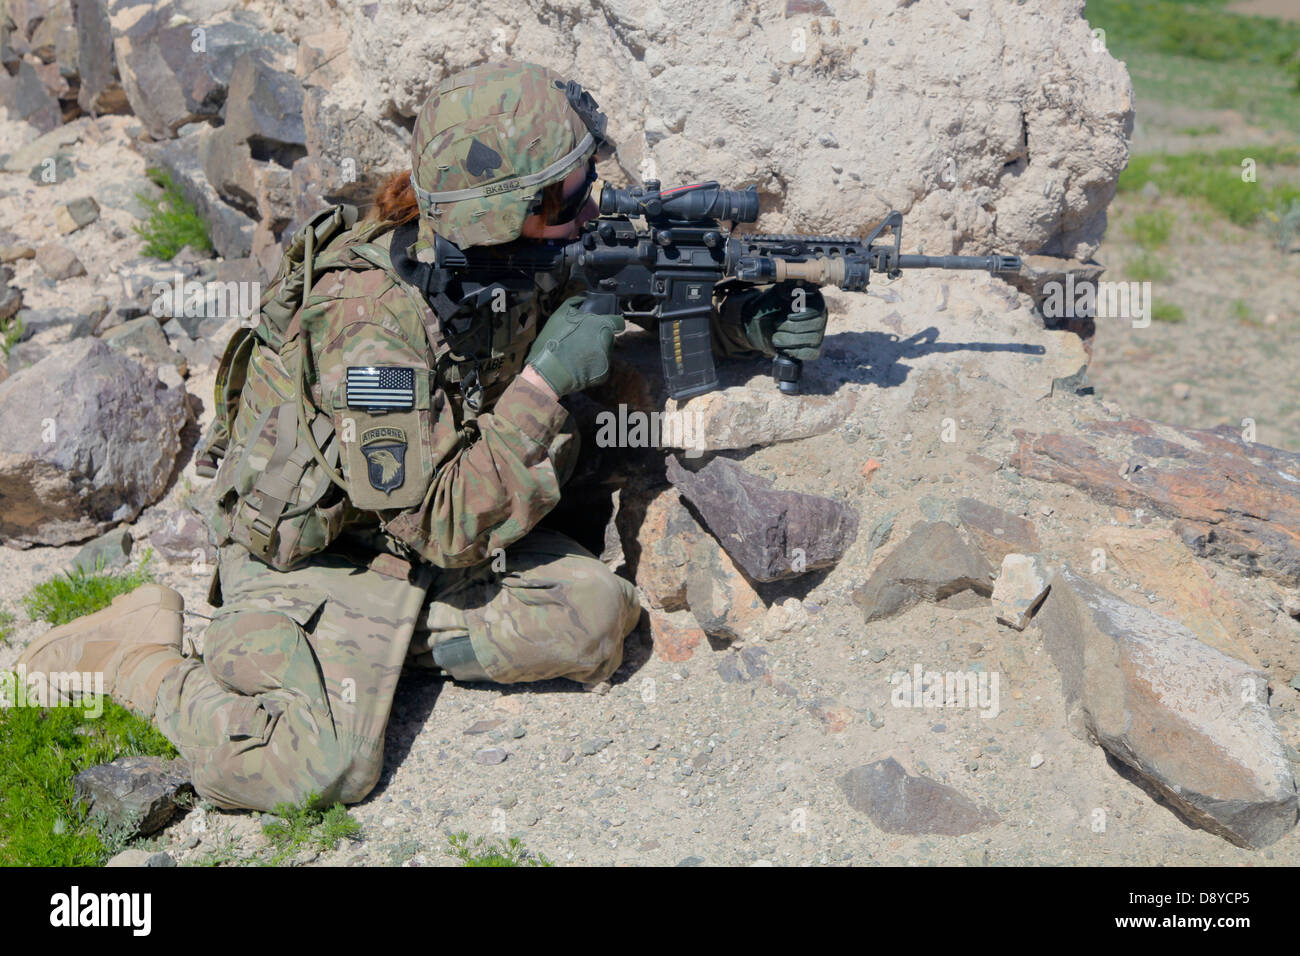 US Army Spc. Brittany Kabe, assigned to a female engagement team with the 101st Airborne Division scans her sector during combat operations May 29, 2013 in Paktia province, Afghanistan. Stock Photo